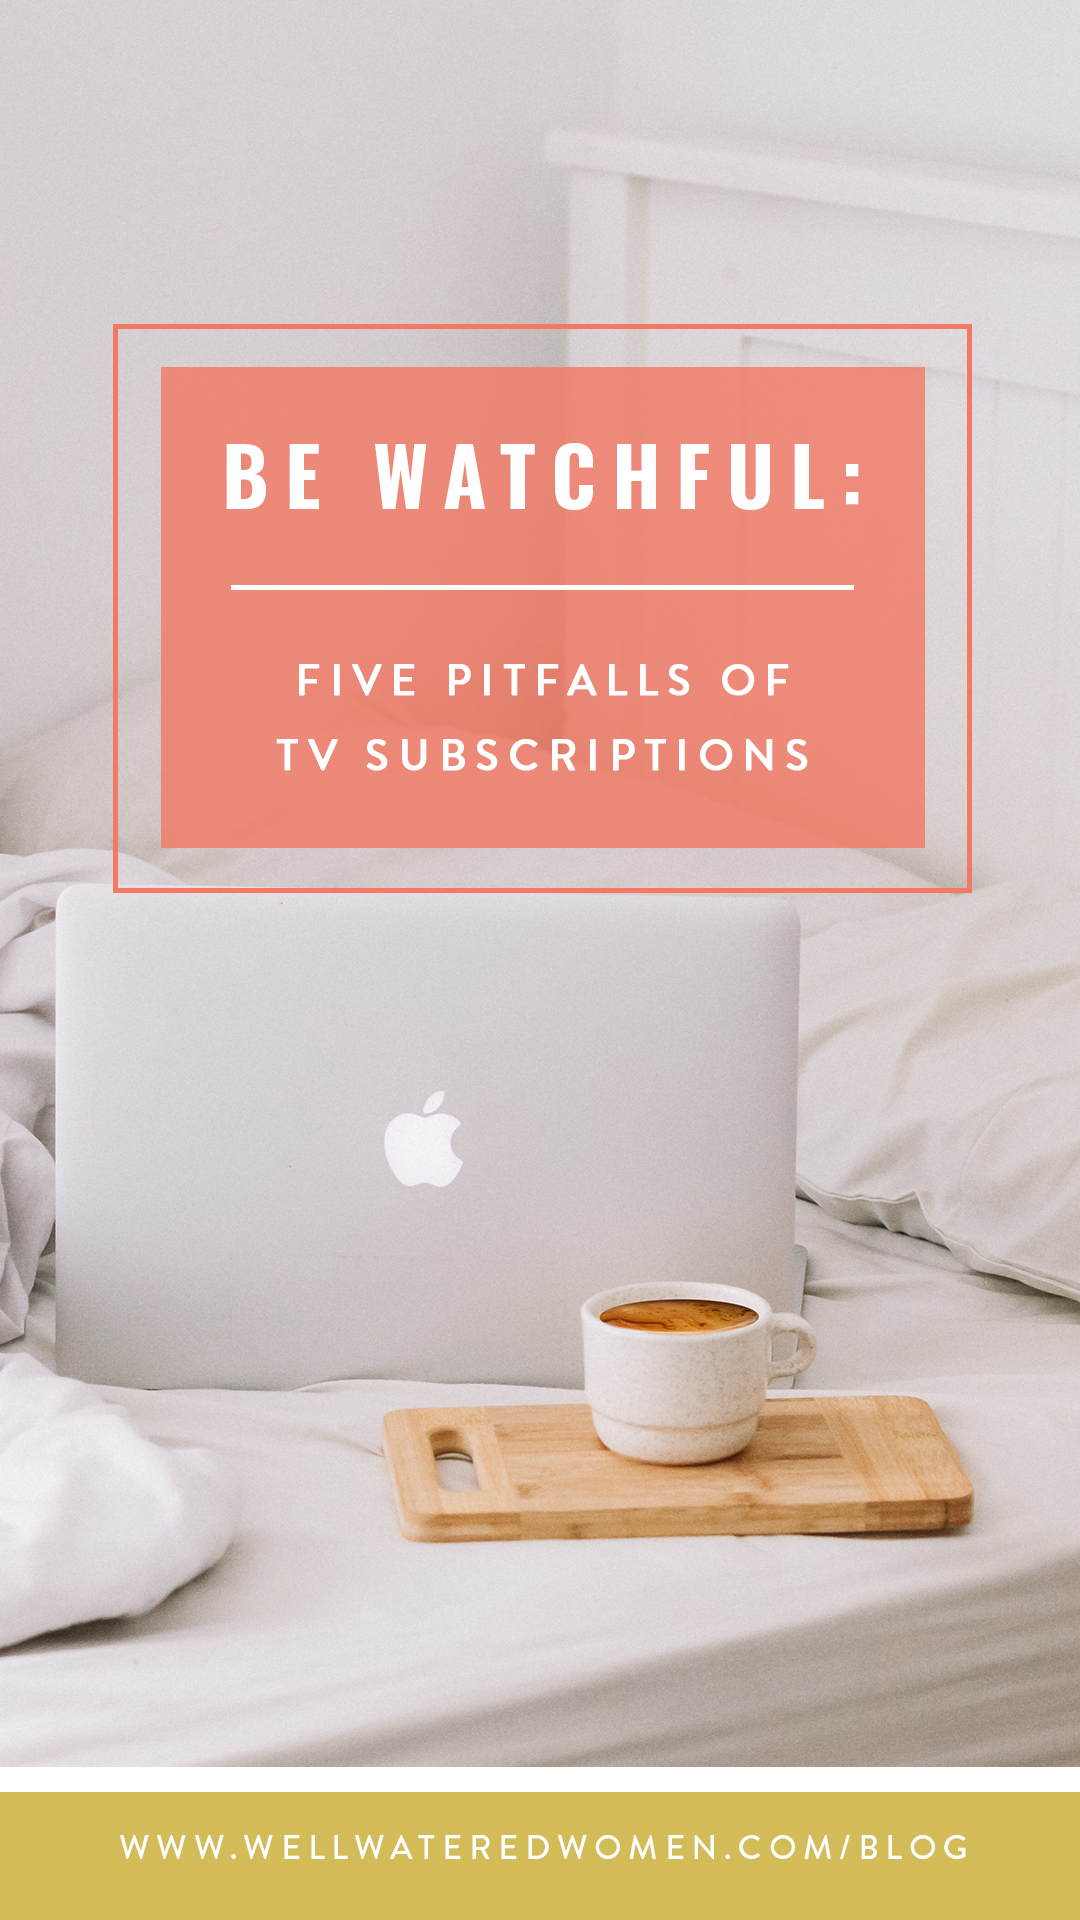 Well-Watered Women Blog-Be Watchful-Five Pitfalls of Tv Subscriptions